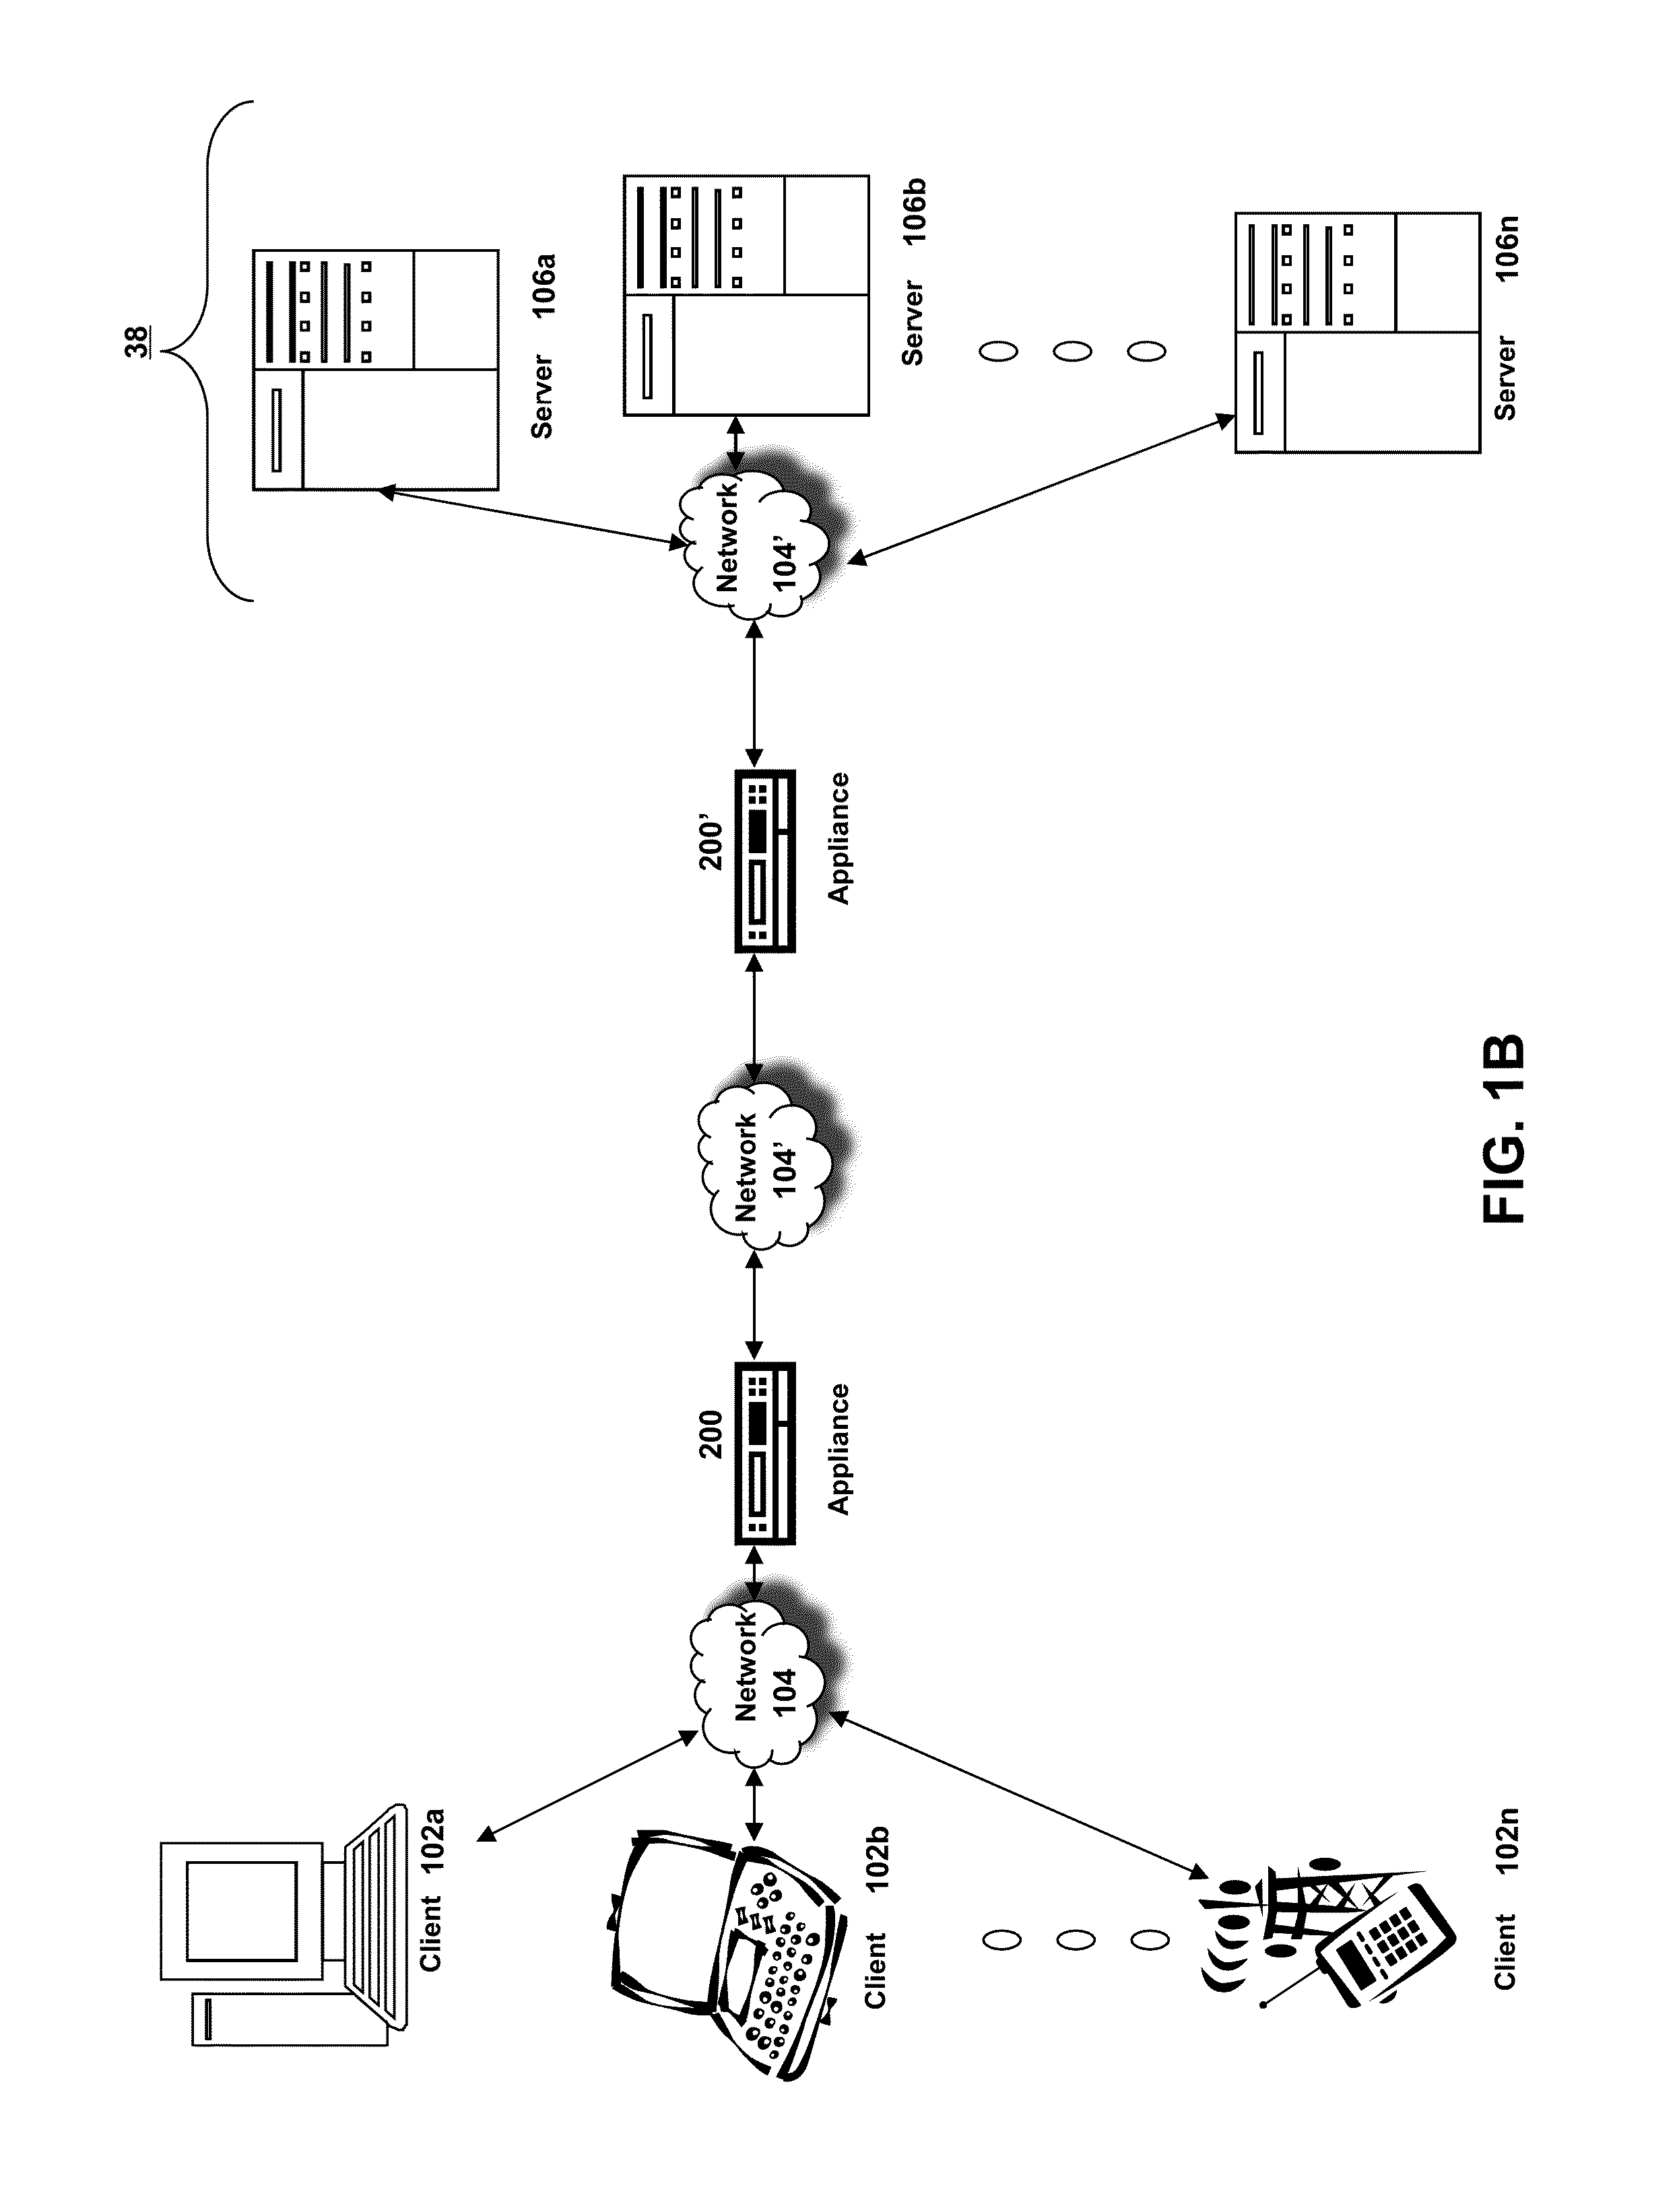 Systems and methods for performing single sign-on by an intermediary device for a remote desktop session of a client